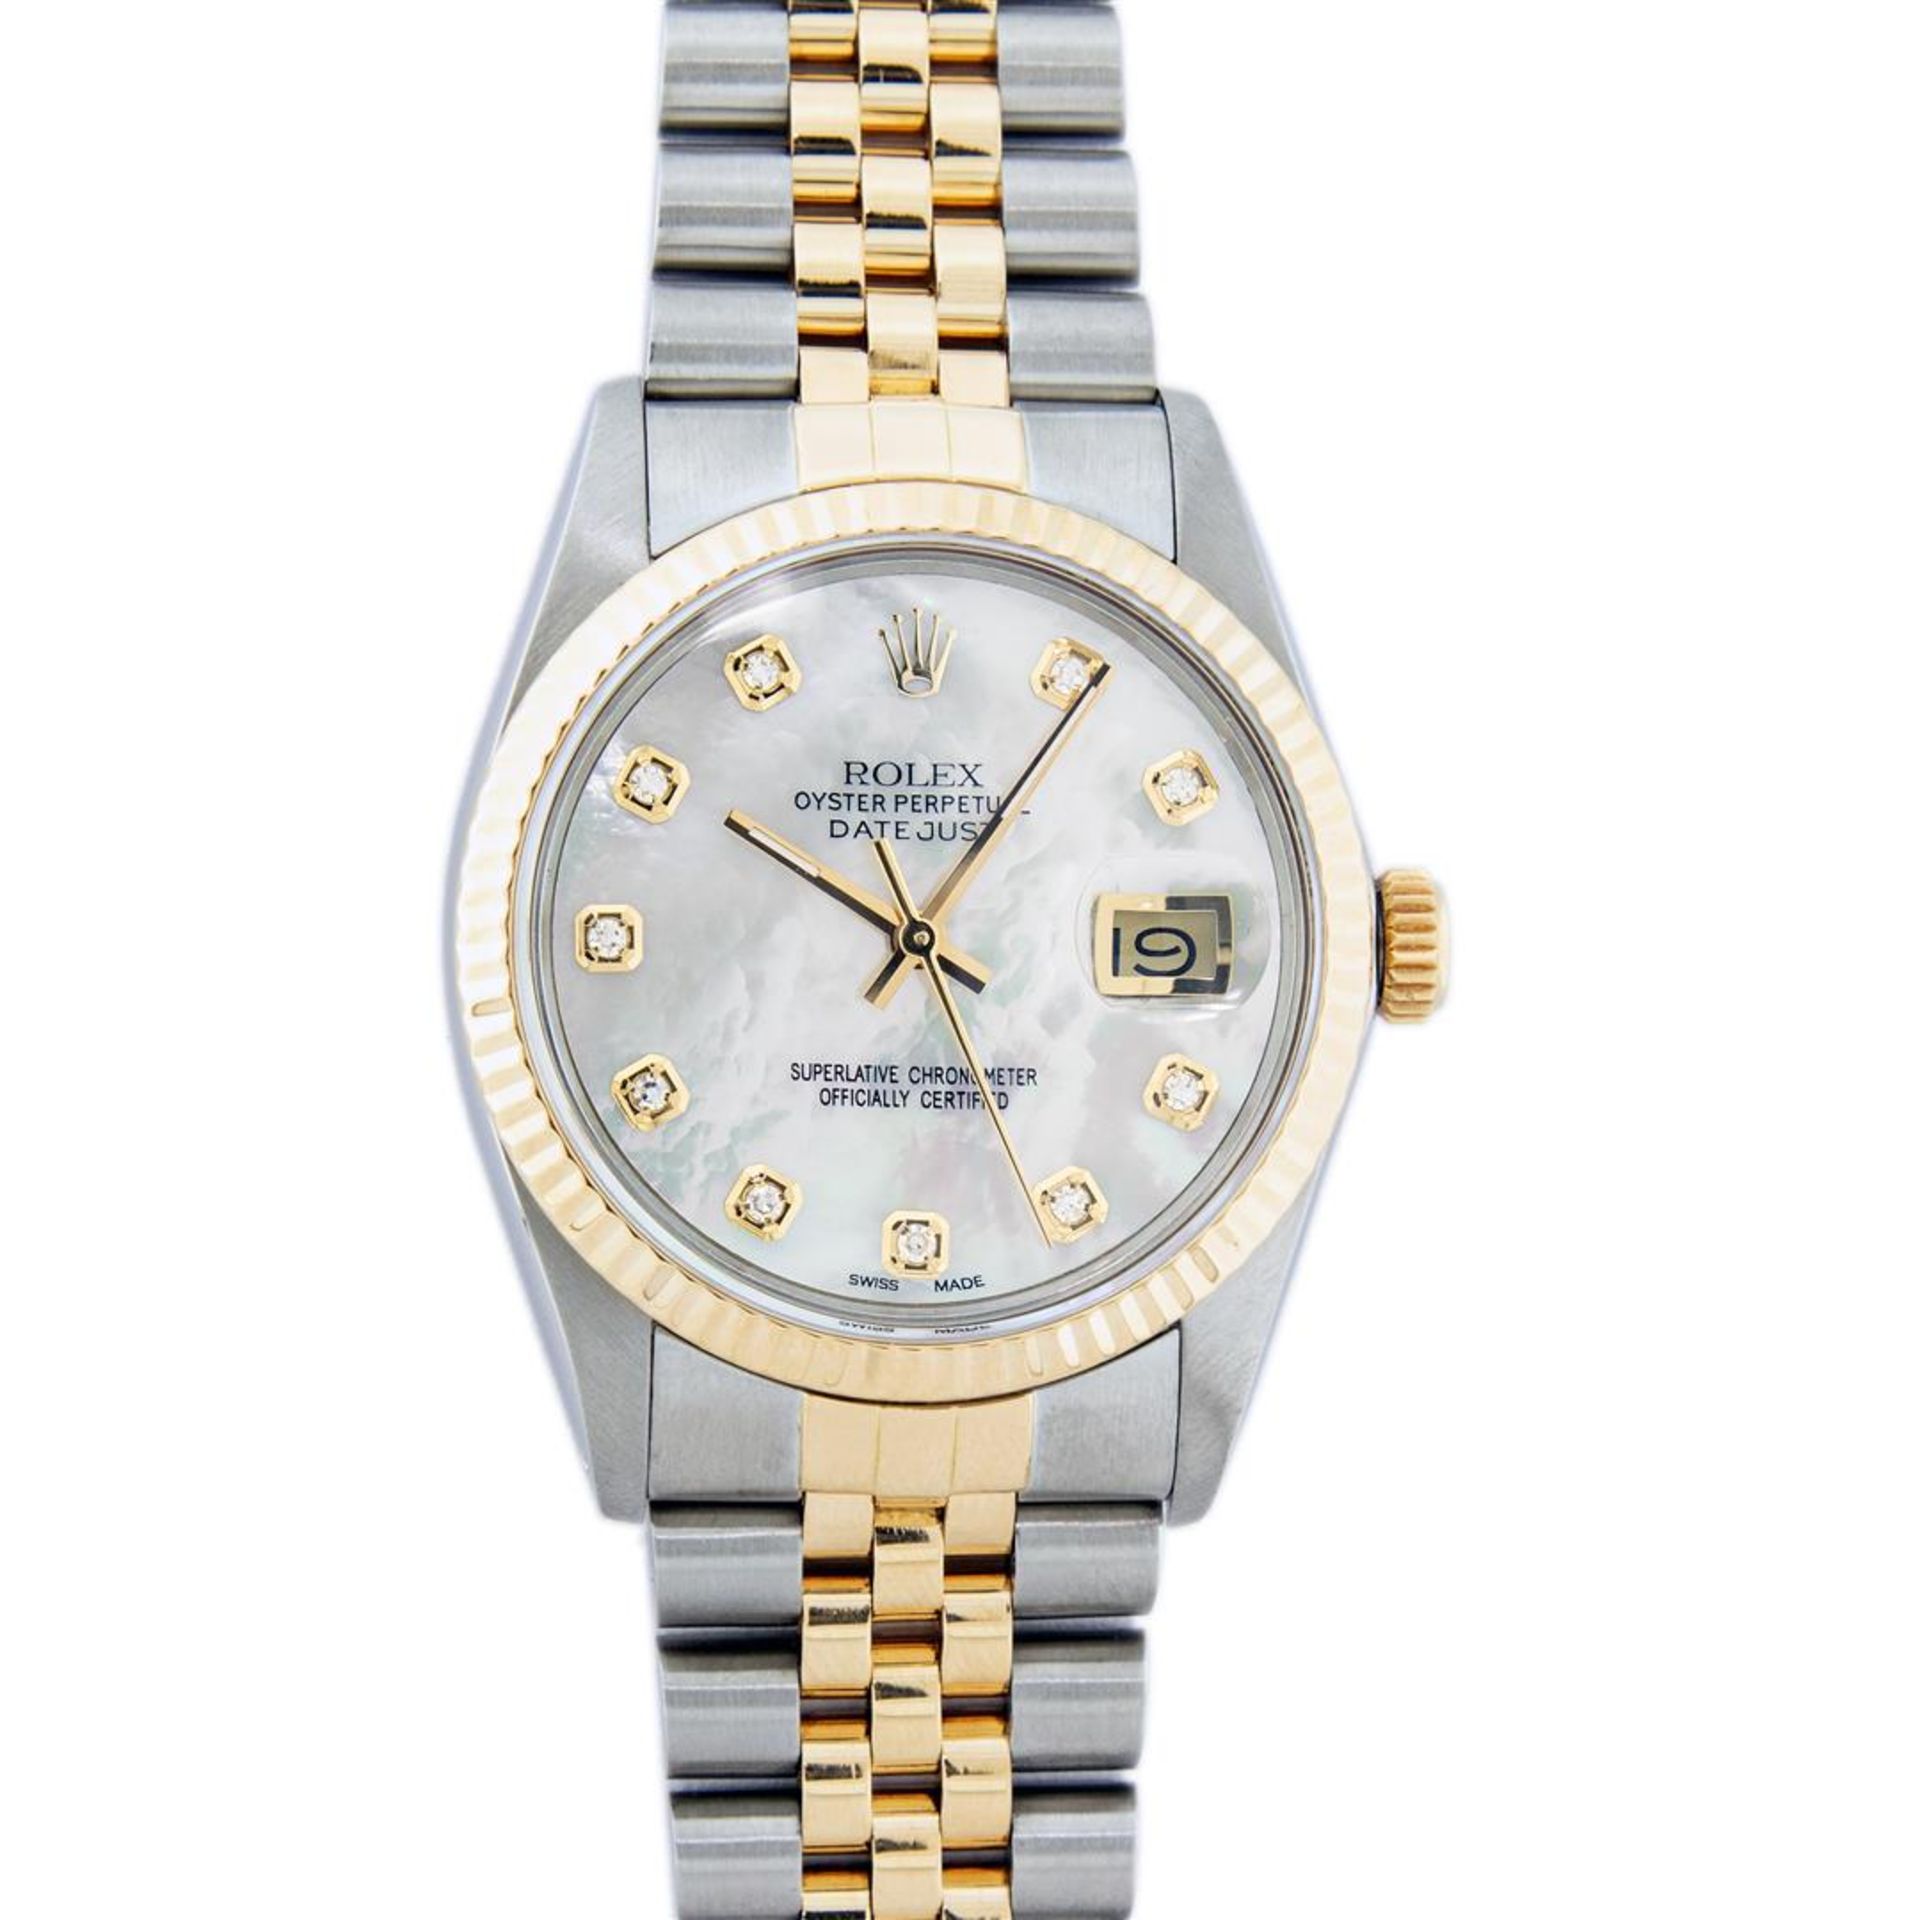 Rolex Mens 2 Tone Mother Of Pearl VS Diamond 36MM Datejust Wristwatch - Image 3 of 18